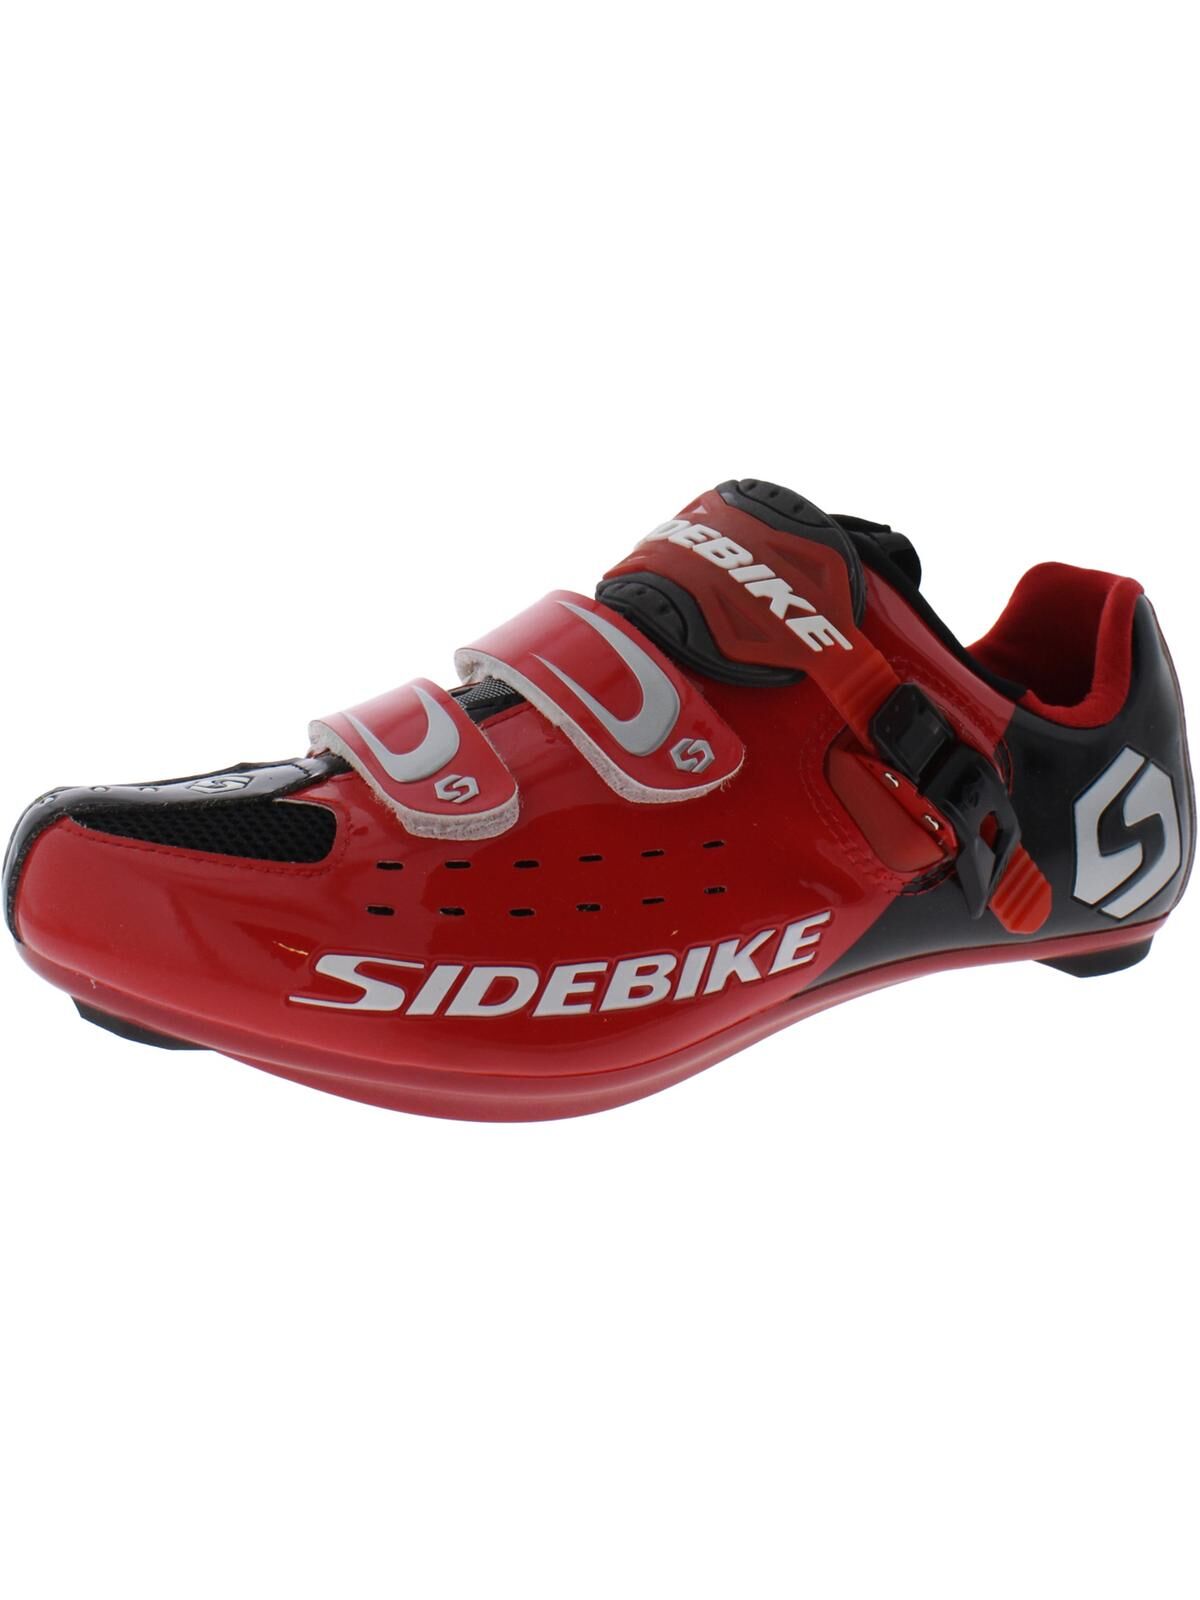 Sidebike Comp Rd Mens Patent Adjustable Cycling Shoes US 8 male